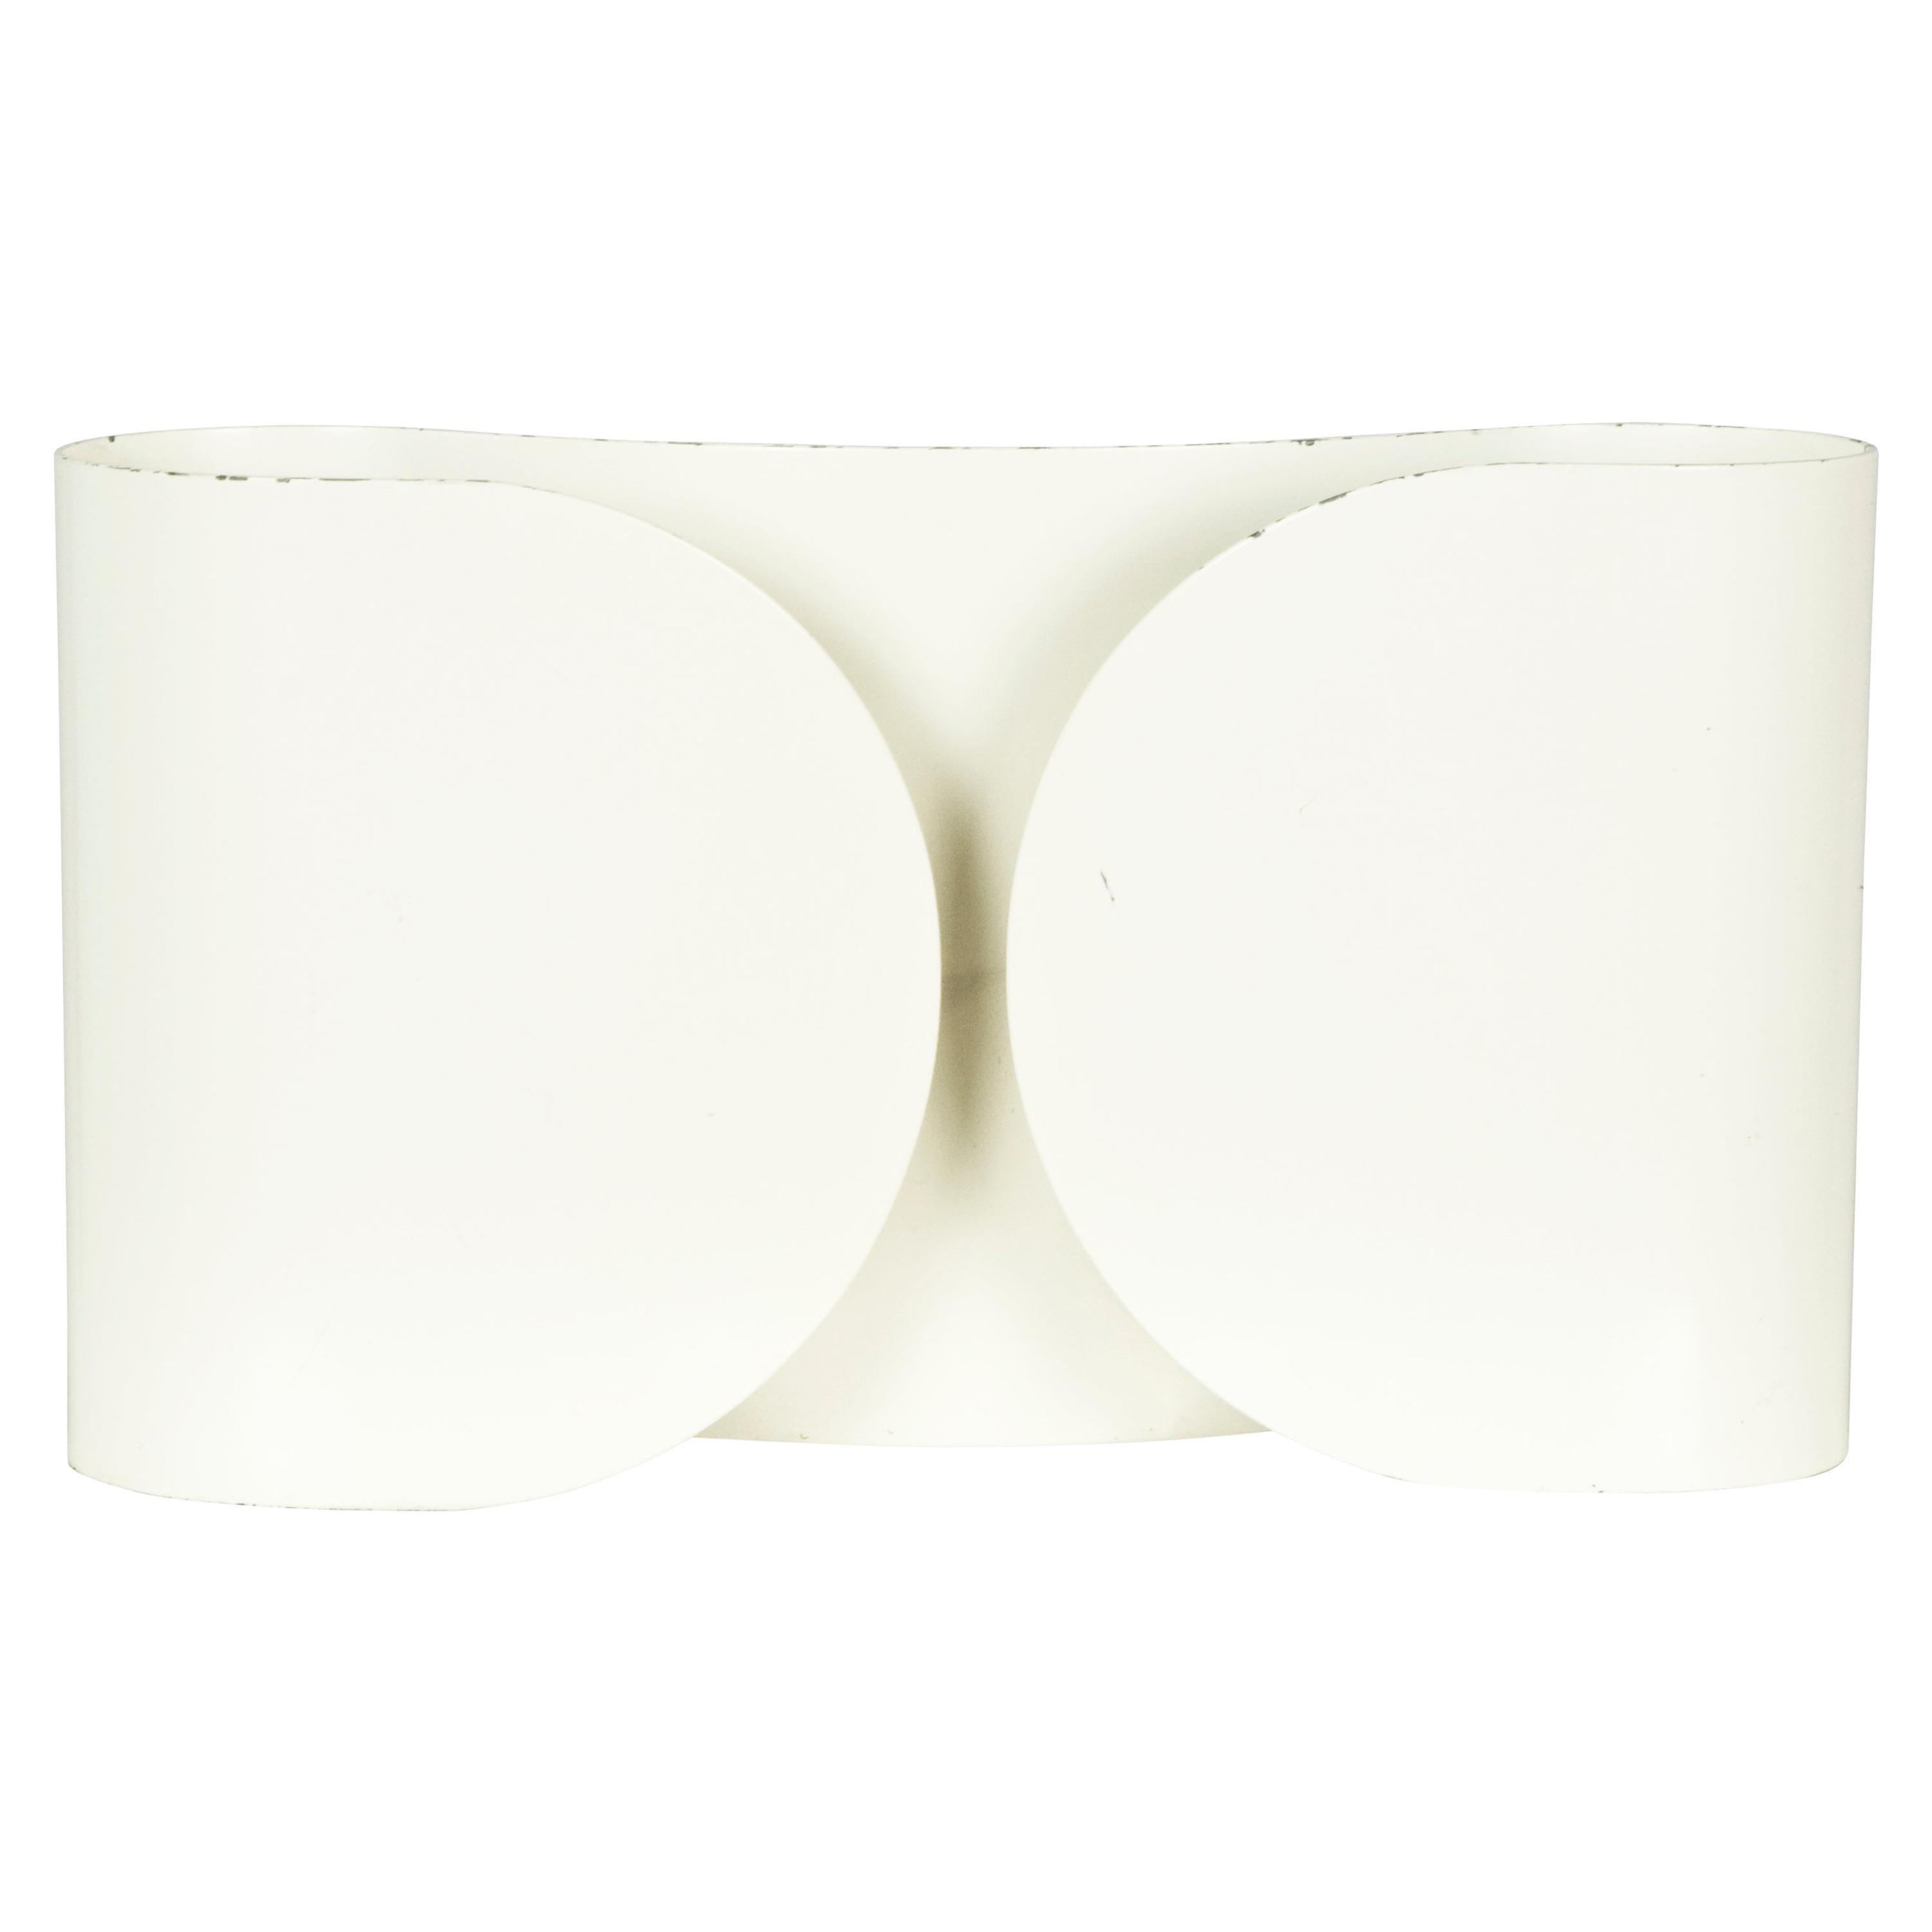 White Laquered Metal 2-Lights Sconce Foglio by Afra Tobia Scarpa for Flos, 1966